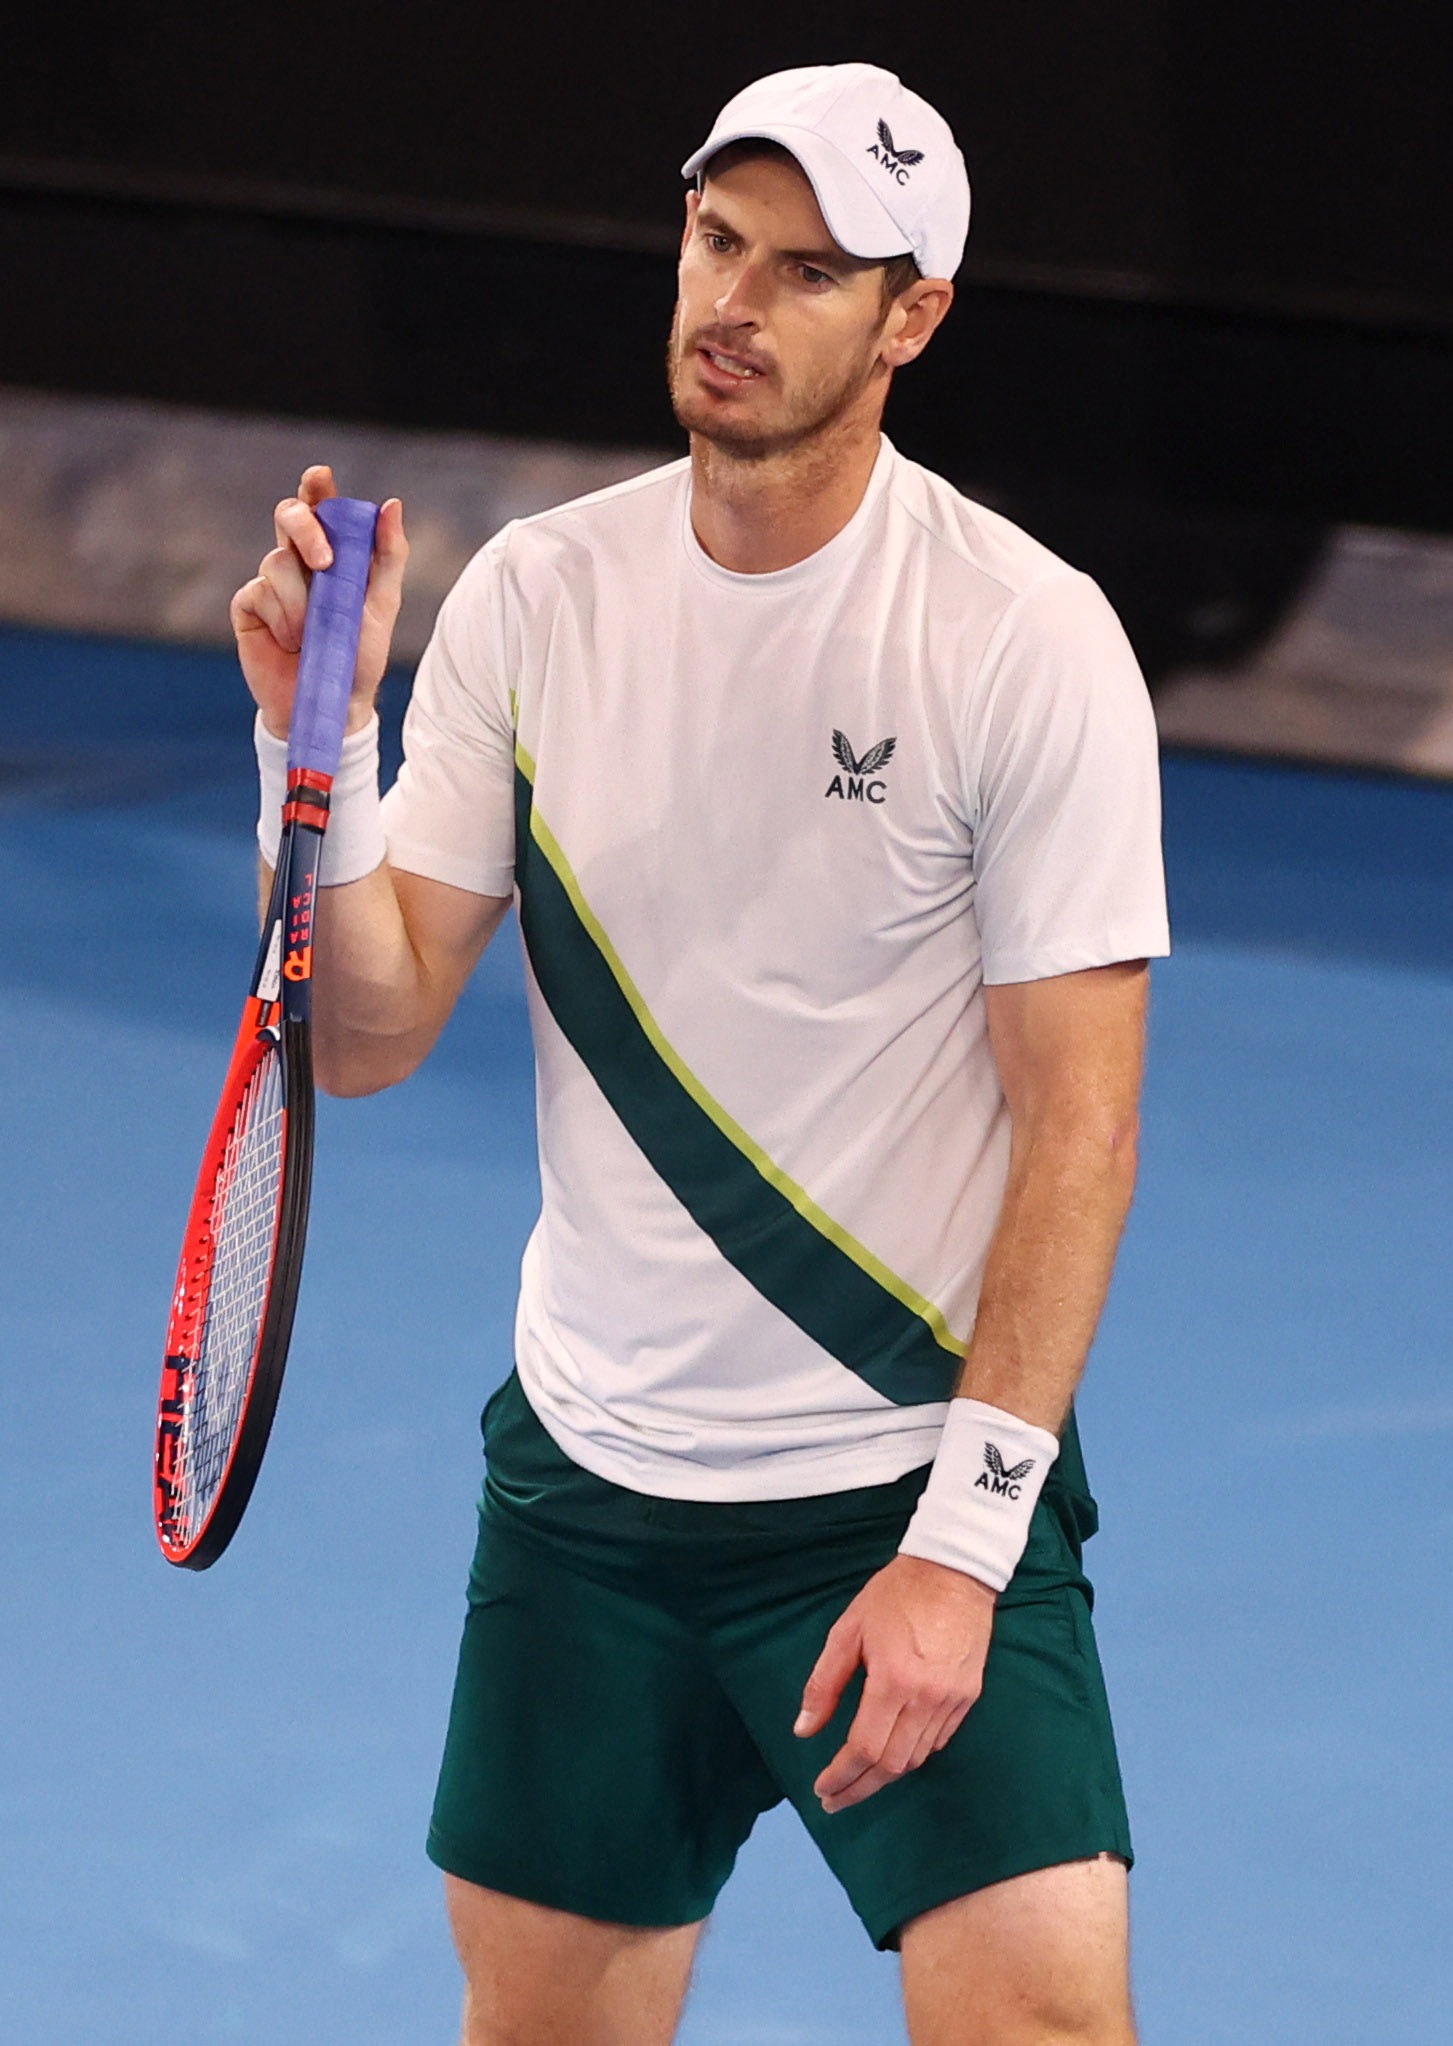 , Heroic Andy Murray crashes out of Australian Open after brave battle with Roberto Bautista Agut in third round